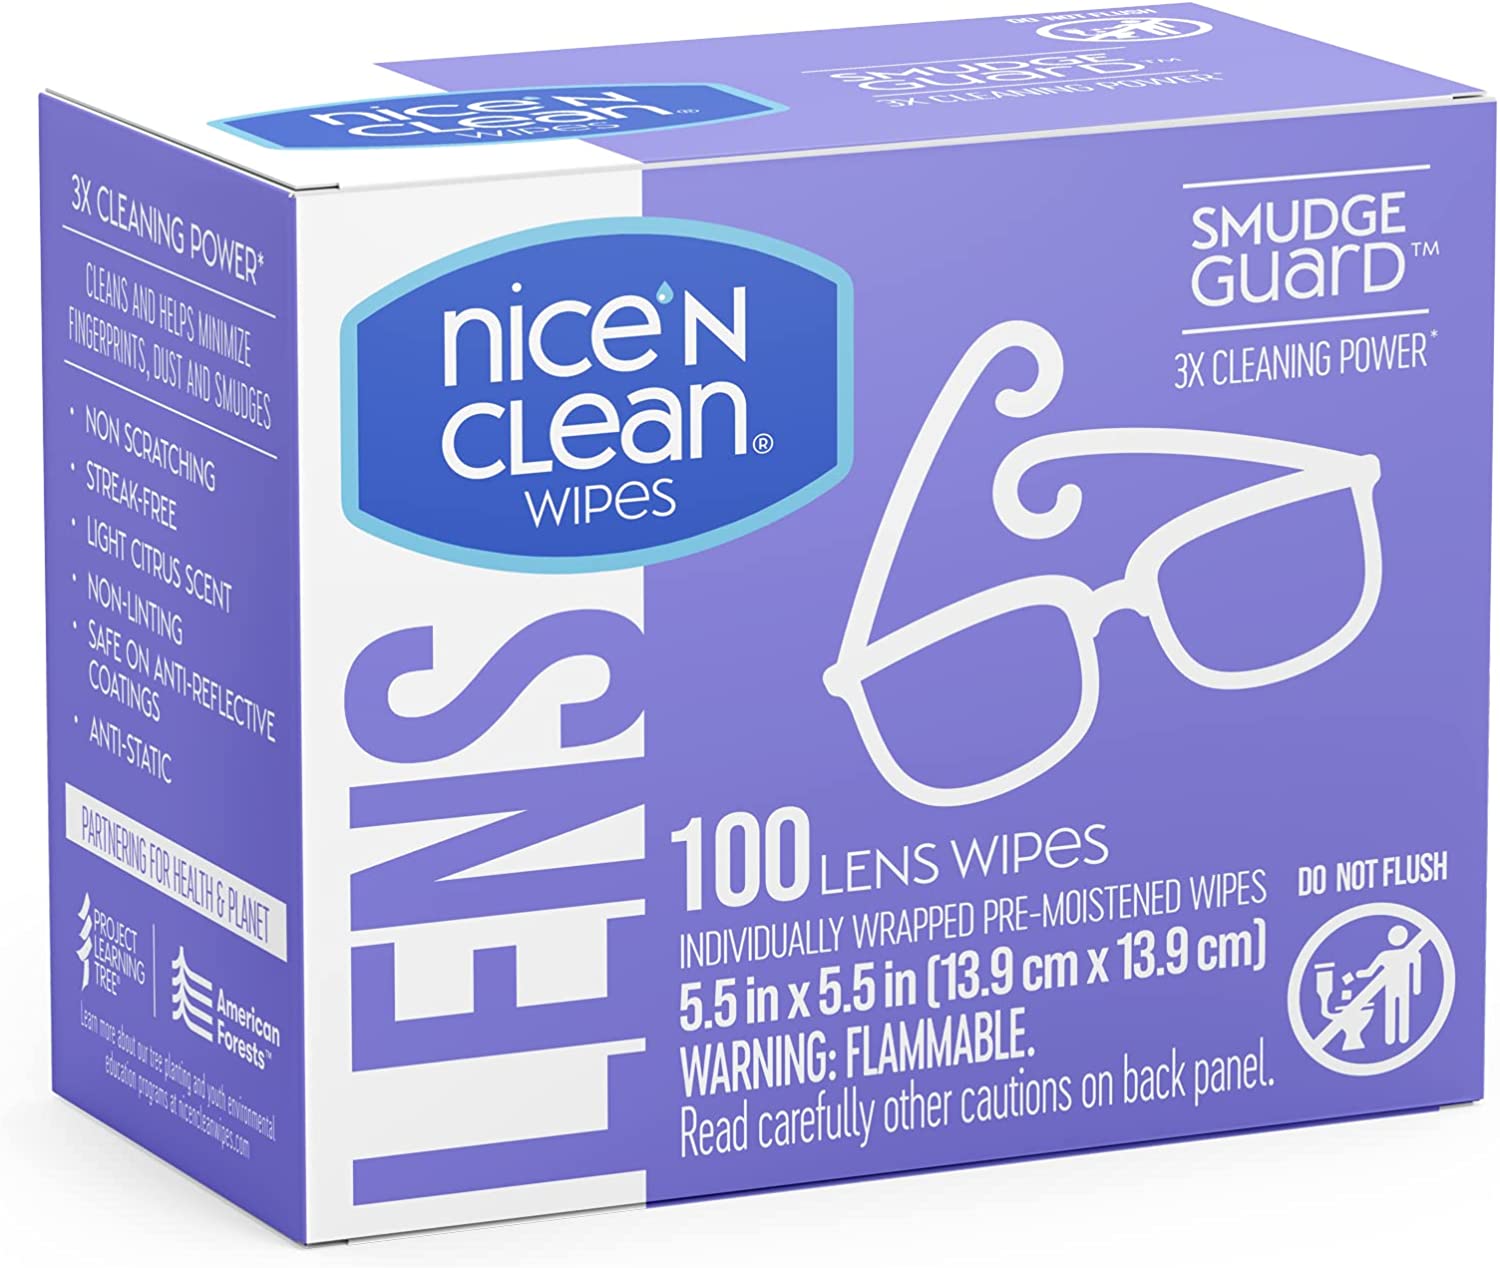 Glasses Wipes Lens Cleaner Lens Wipes for Eyeglasses - 100 Pre-moistened  Individually Wrapped Wipes for Eye Glasses, Electronics, Phone, Computer